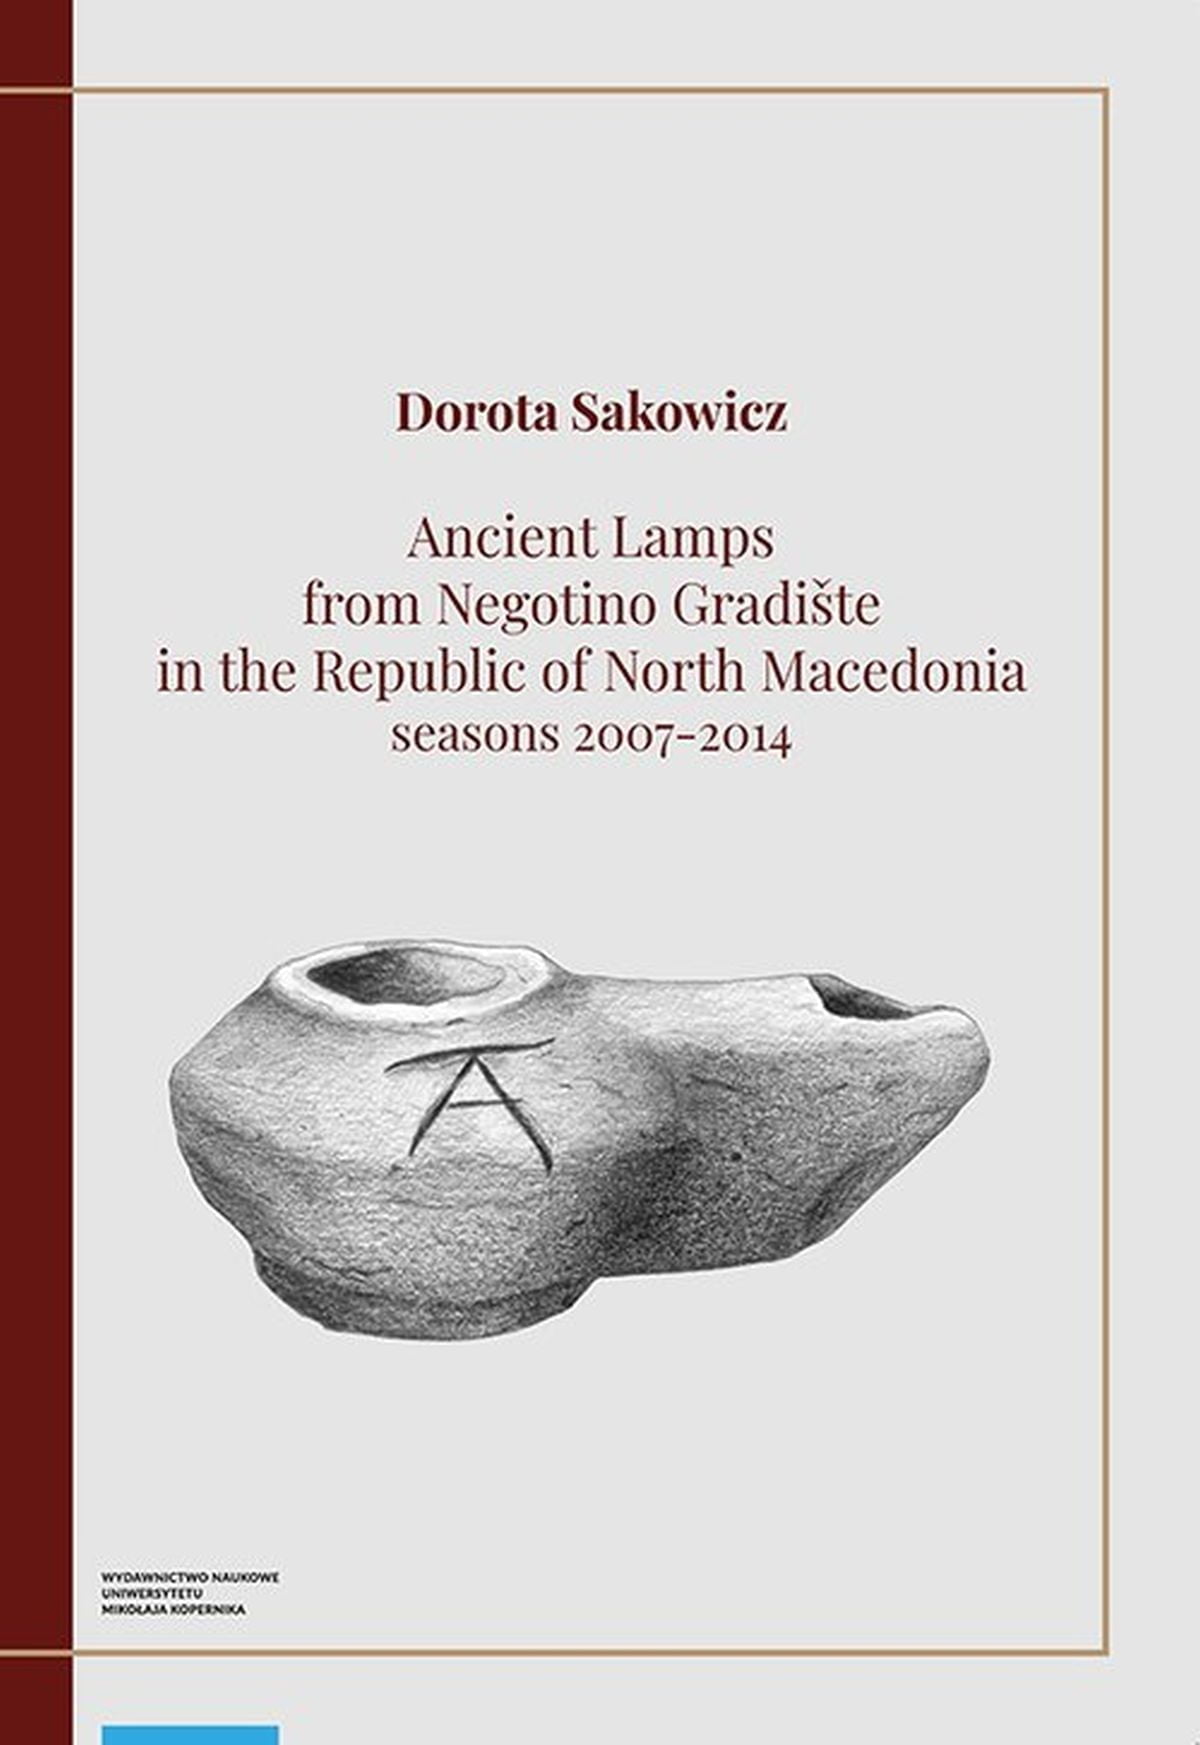 Dorota Sakowicz, Ancient Lamps from Negotino Gradište in the Republic of North Macedonia